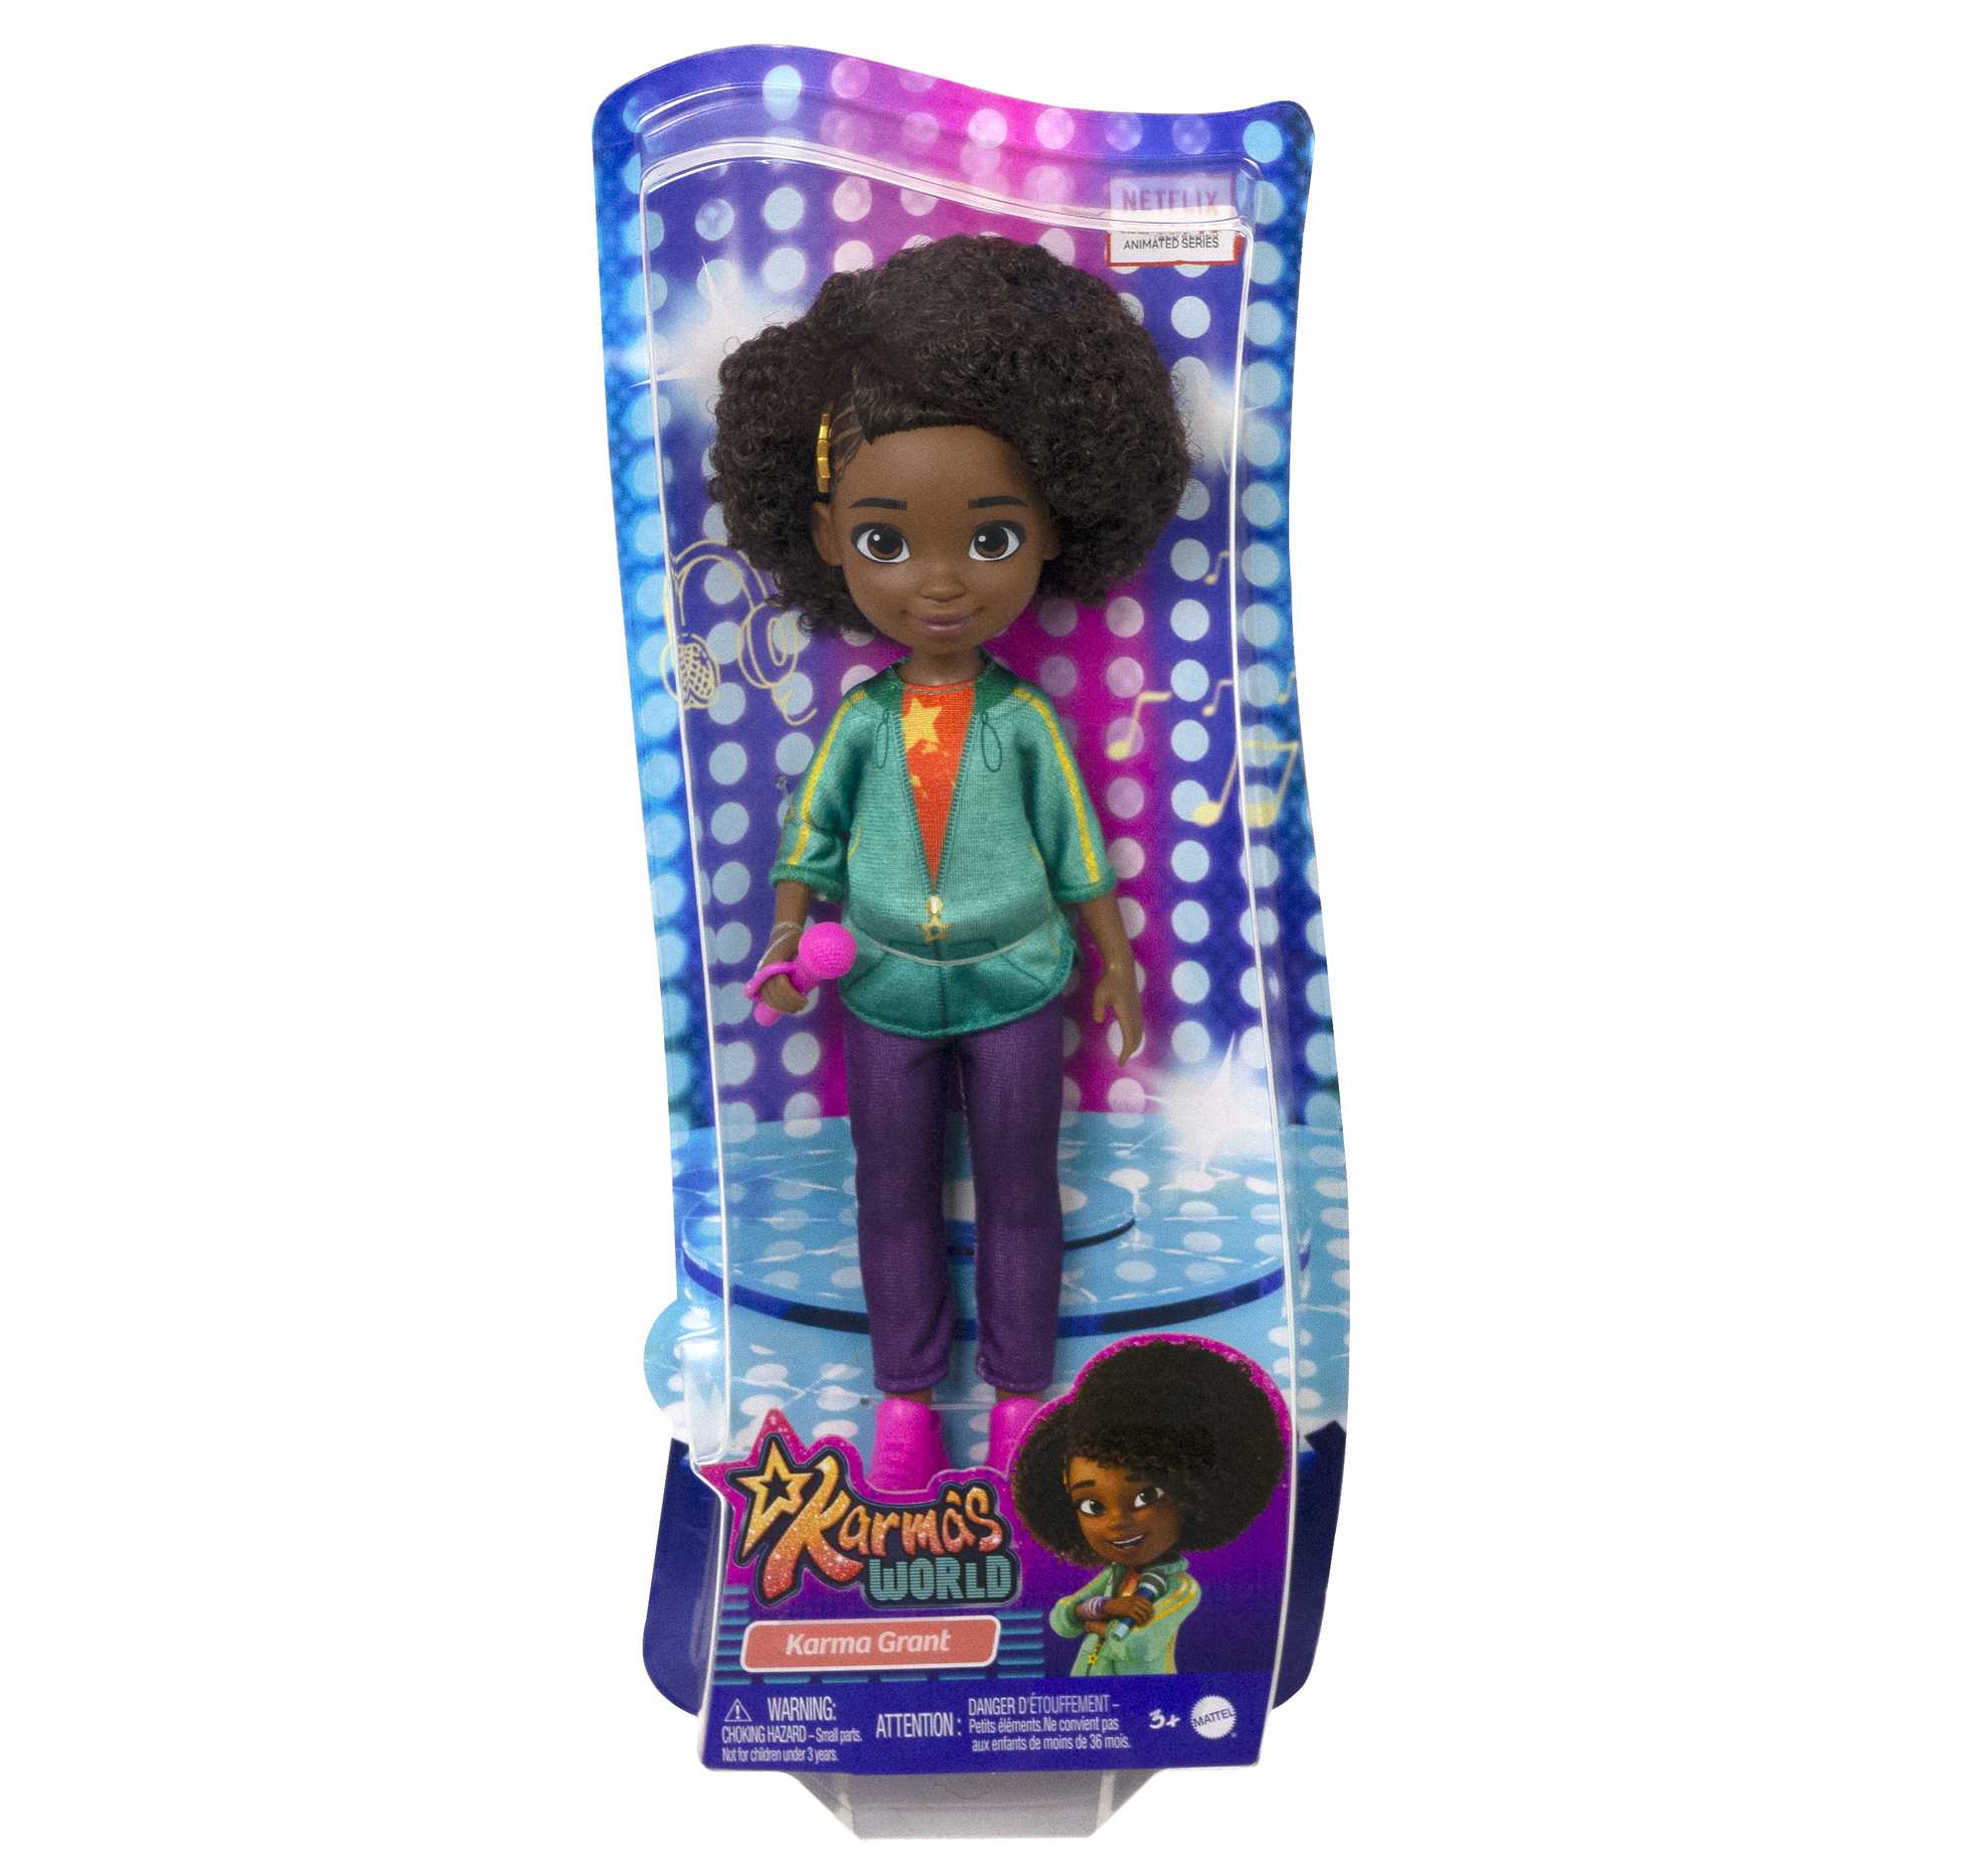 Mattel Launches 'Karma's World' Doll Collection Featuring Vibrant